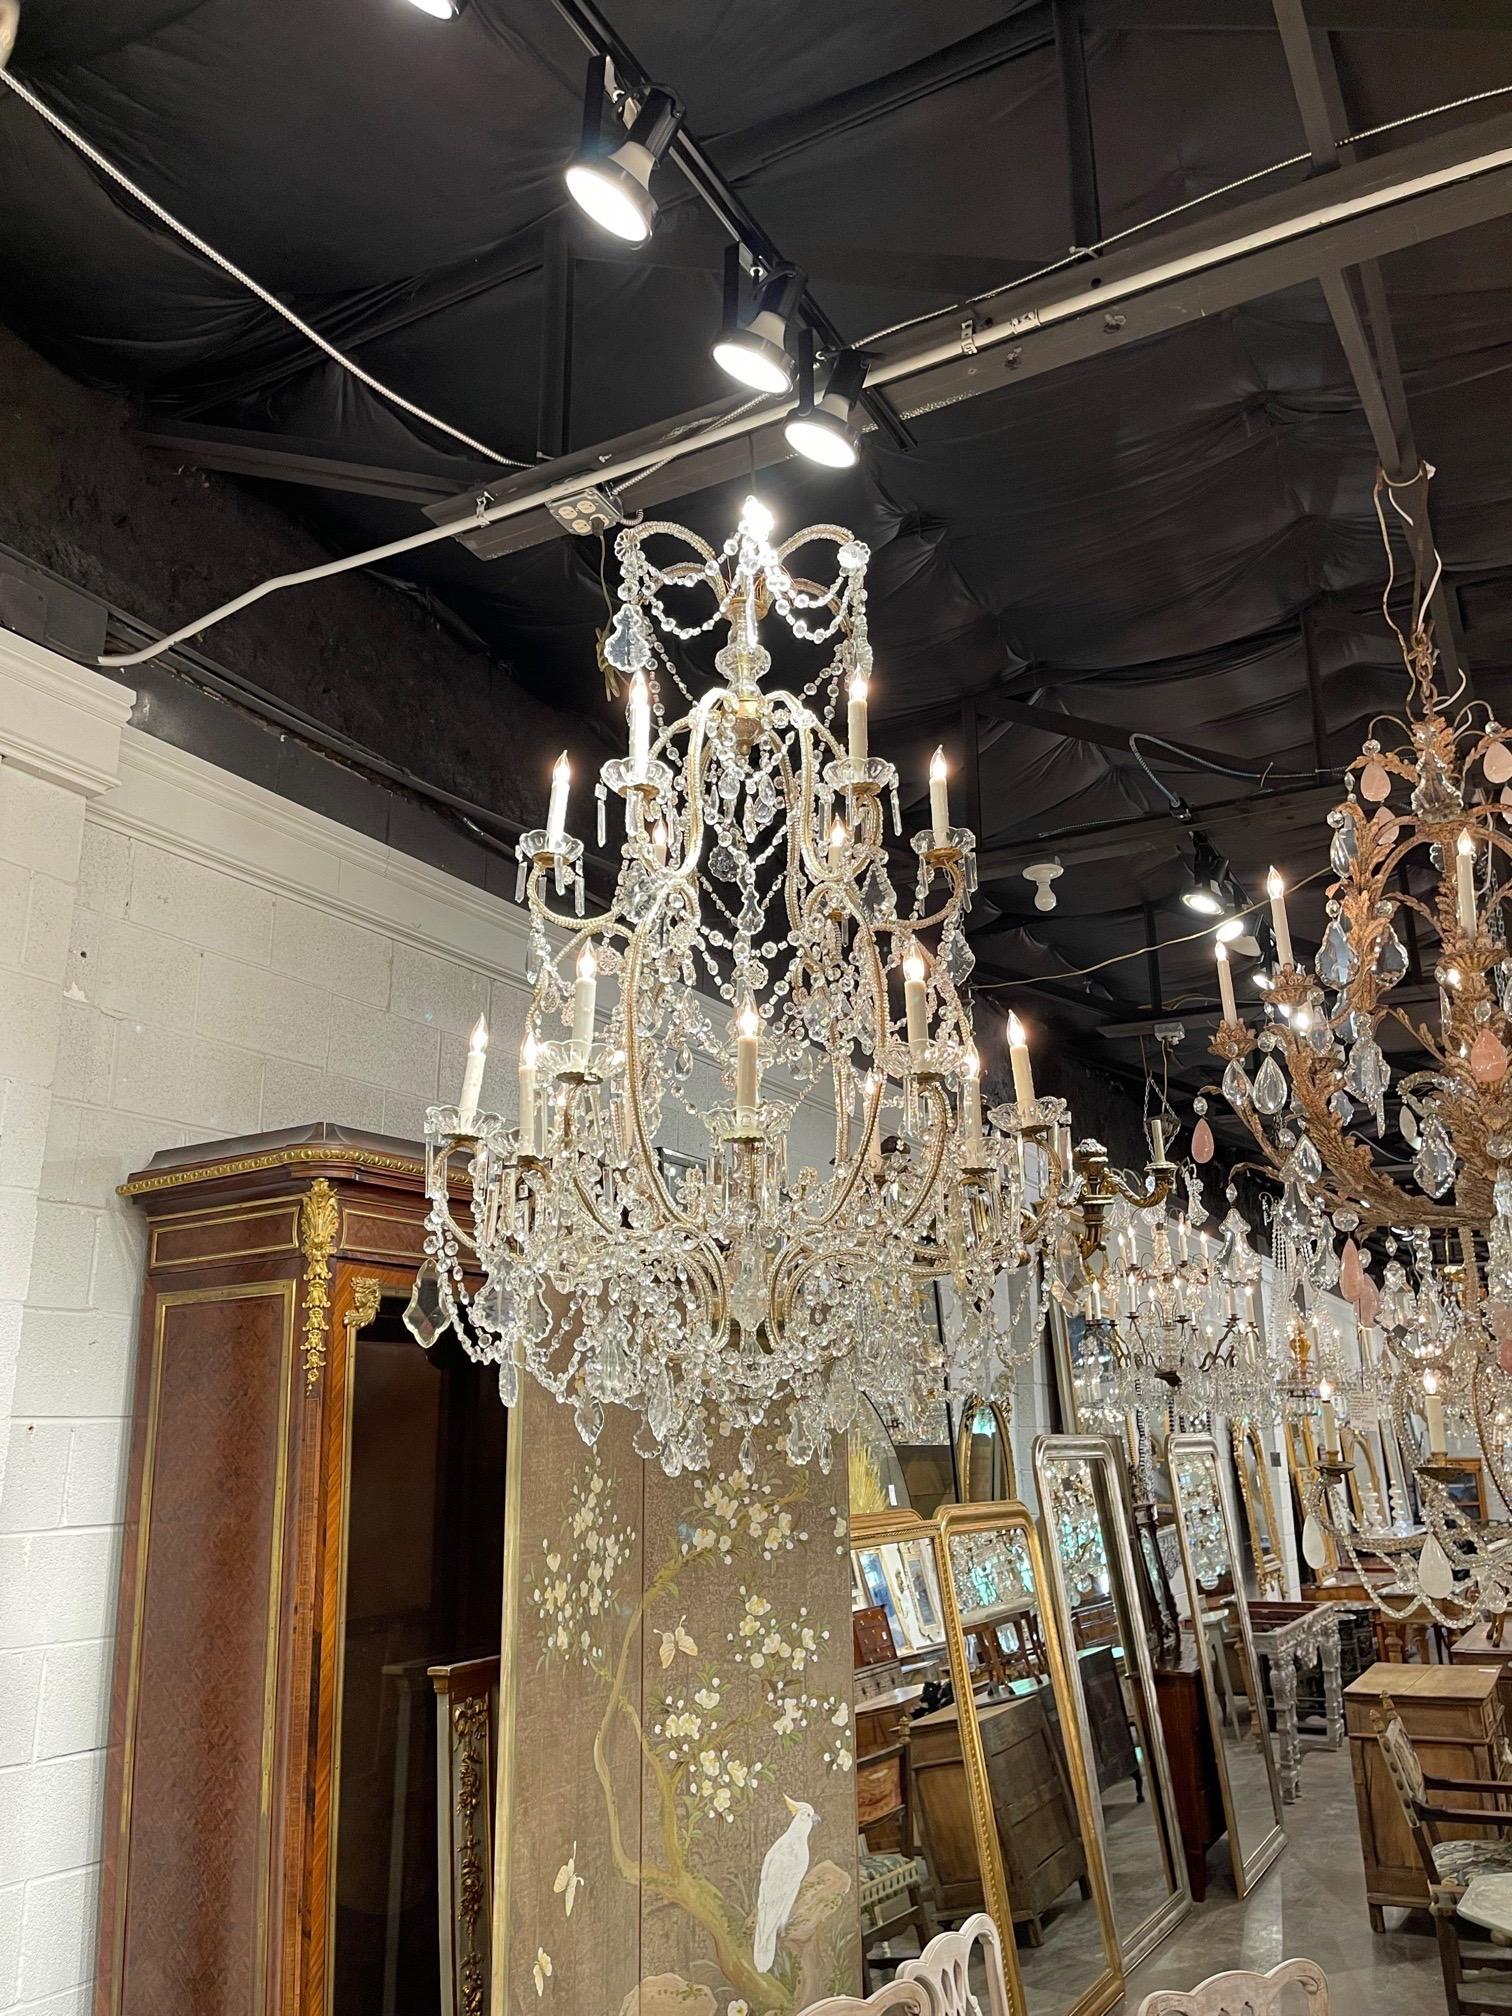 Gorgeous large scale Italian beaded chandelier with 18 lights. Covered in beautiful crystals and beads. Very elegant!! Creates an amazing presence!